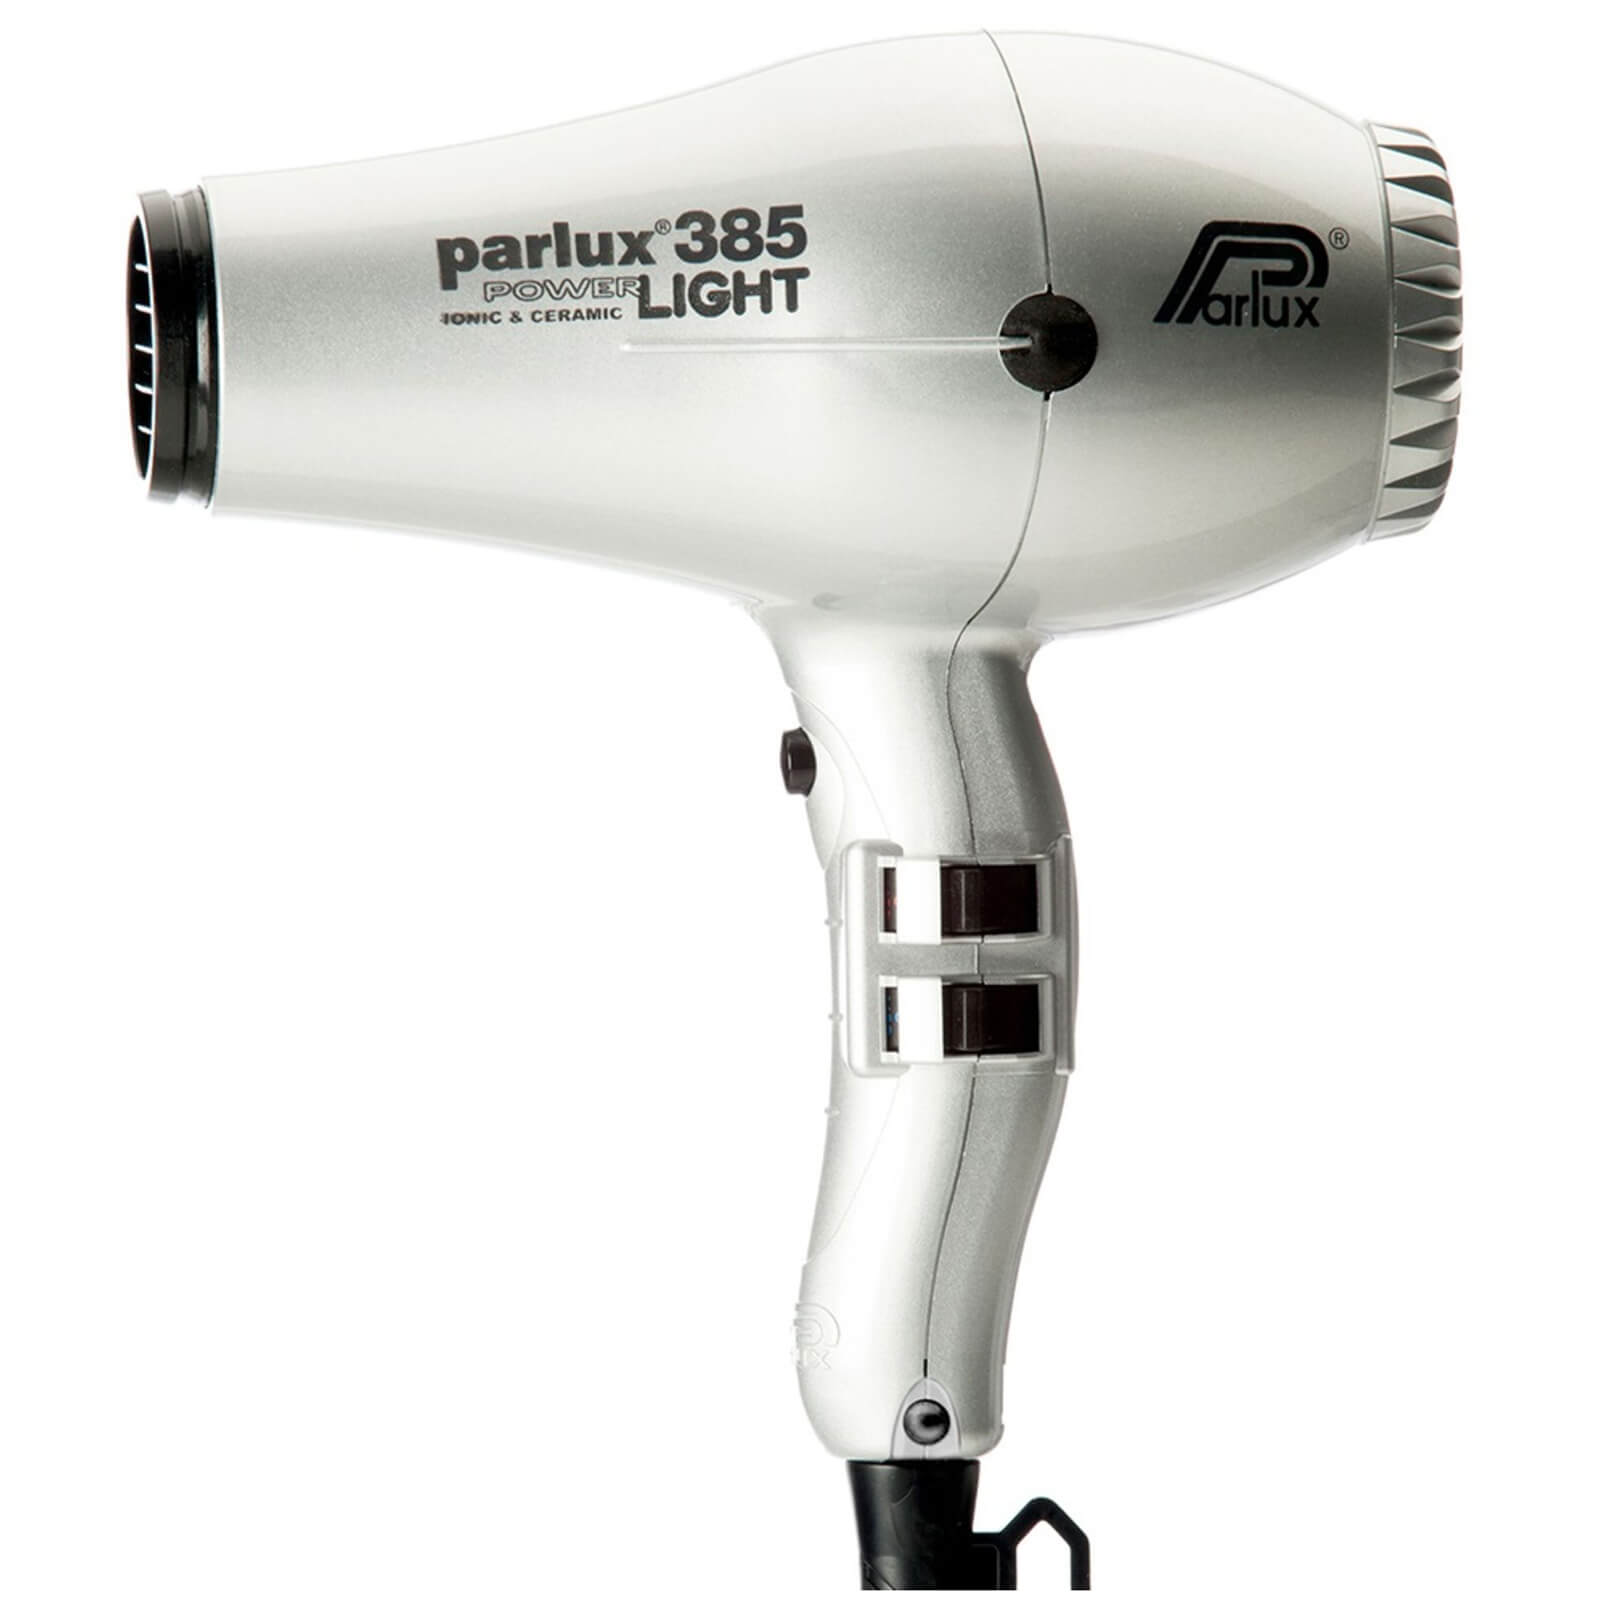 Parlux 385 Power Light Hair Dryer 2150W (Various Shades) - Silver